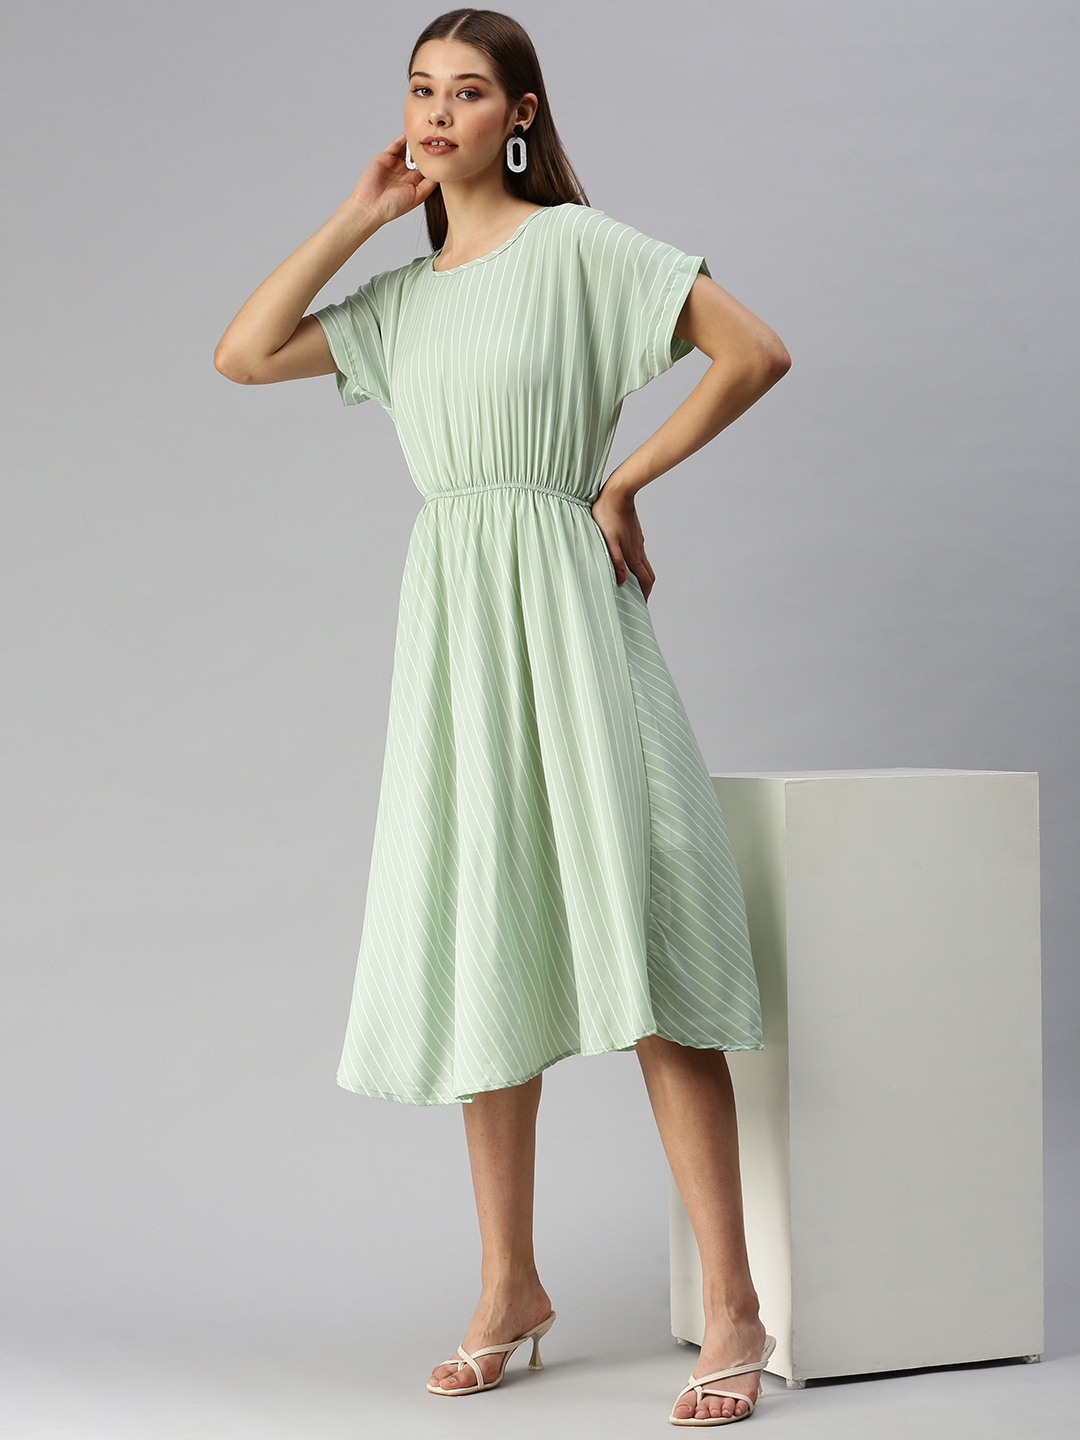 SHOWOFF Women's Striped Green Fit and Flare Dress